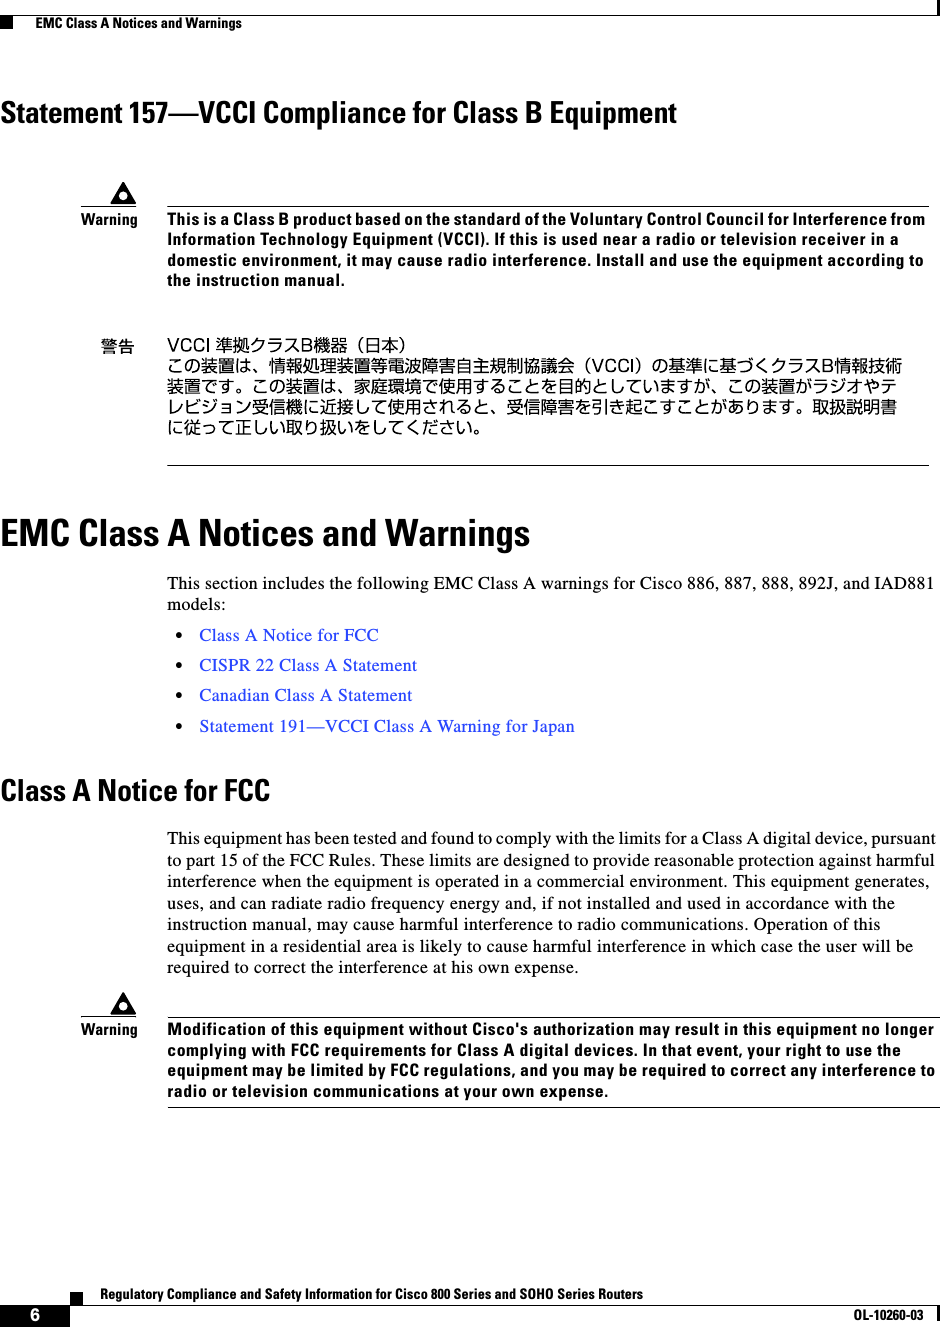  6Regulatory Compliance and Safety Information for Cisco 800 Series and SOHO Series RoutersOL-10260-03  EMC Class A Notices and WarningsStatement 157—VCCI Compliance for Class B EquipmentEMC Class A Notices and WarningsThis section includes the following EMC Class A warnings for Cisco 886, 887, 888, 892J, and IAD881 models:•Class A Notice for FCC•CISPR 22 Class A Statement•Canadian Class A Statement•Statement 191—VCCI Class A Warning for JapanClass A Notice for FCCThis equipment has been tested and found to comply with the limits for a Class A digital device, pursuant to part 15 of the FCC Rules. These limits are designed to provide reasonable protection against harmful interference when the equipment is operated in a commercial environment. This equipment generates, uses, and can radiate radio frequency energy and, if not installed and used in accordance with the instruction manual, may cause harmful interference to radio communications. Operation of this equipment in a residential area is likely to cause harmful interference in which case the user will be required to correct the interference at his own expense.WarningModification of this equipment without Cisco&apos;s authorization may result in this equipment no longer complying with FCC requirements for Class A digital devices. In that event, your right to use the equipment may be limited by FCC regulations, and you may be required to correct any interference to radio or television communications at your own expense.WarningThis is a Class B product based on the standard of the Voluntary Control Council for Interference from Information Technology Equipment (VCCI). If this is used near a radio or television receiver in a domestic environment, it may cause radio interference. Install and use the equipment according to the instruction manual.